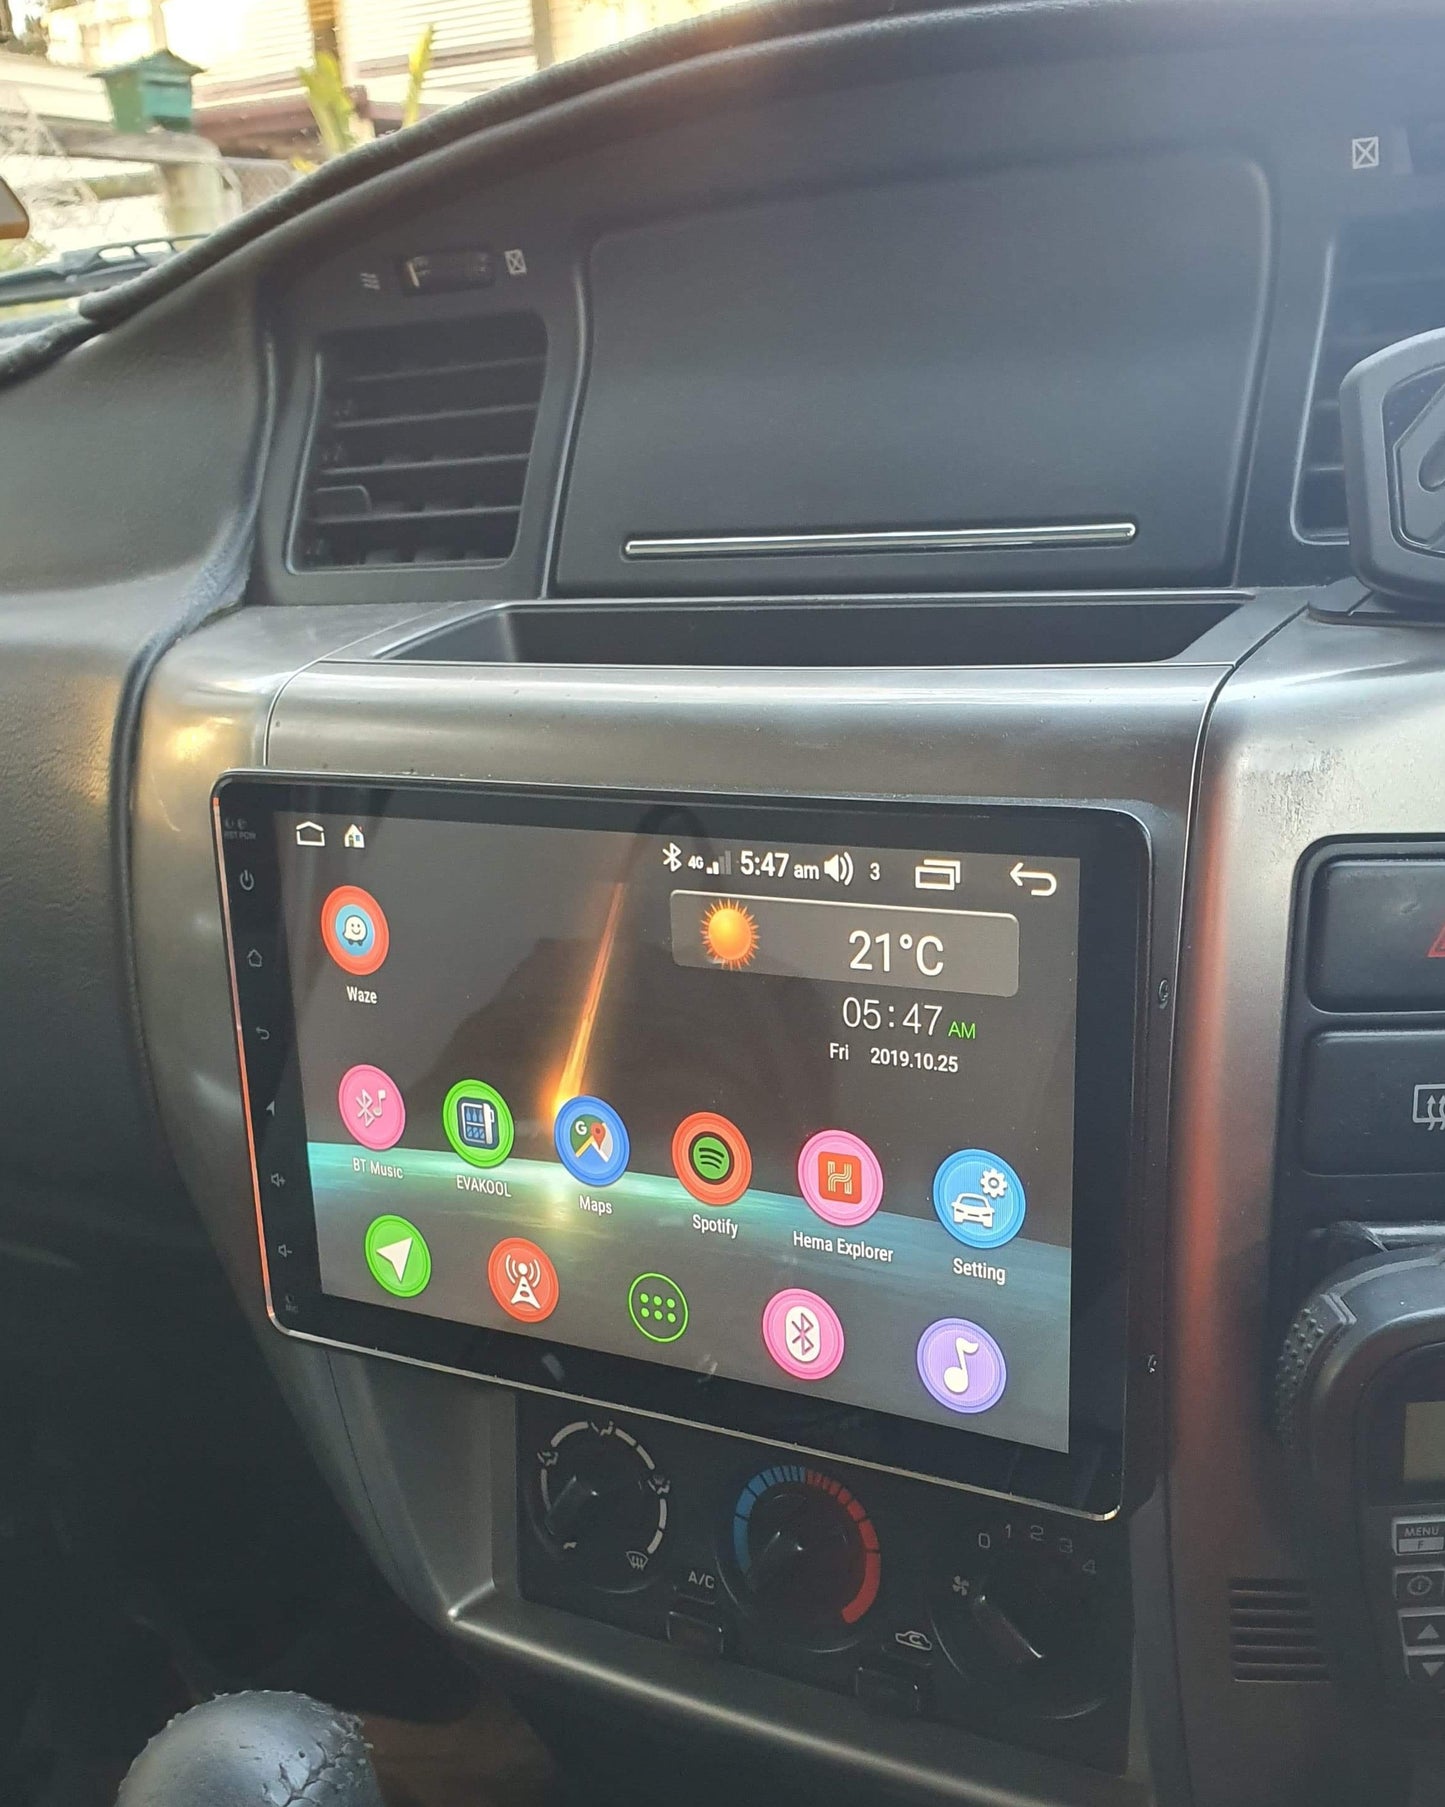 9inch Android Head Unit to suit Nissan PATROL GU